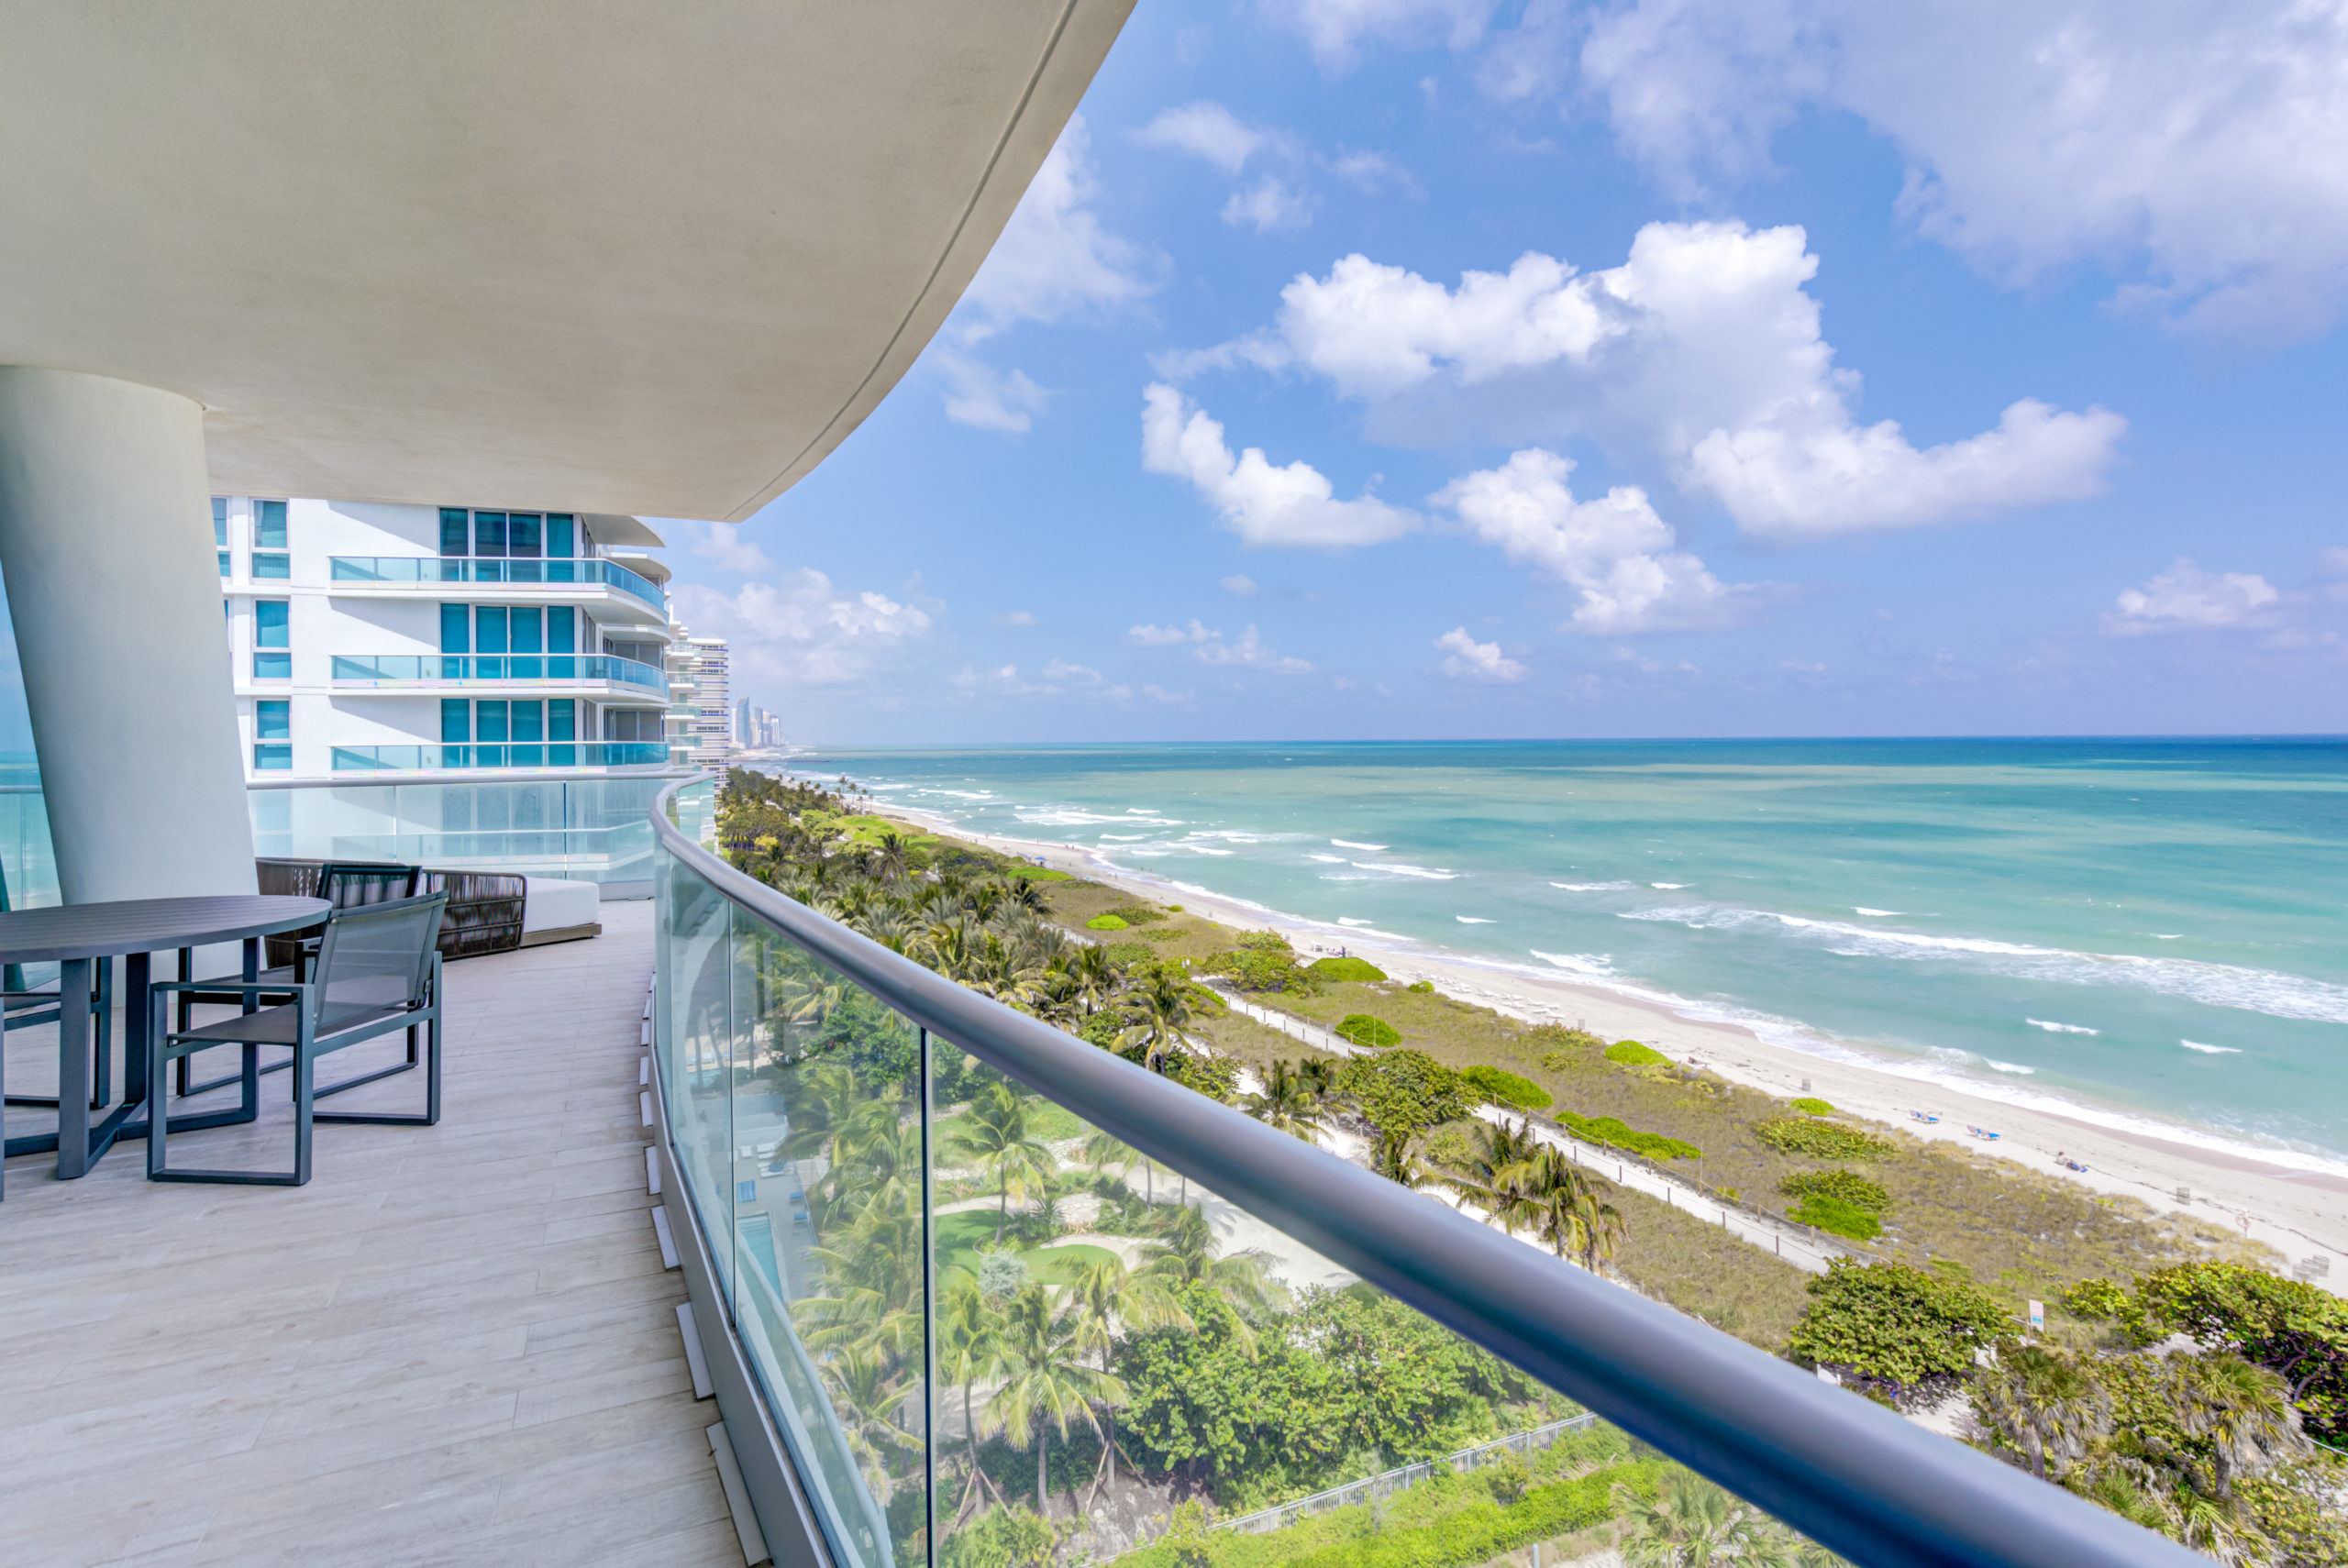 Continuum South Beach is One of The Best Miami Beach Condos for Tax Refugees DSG